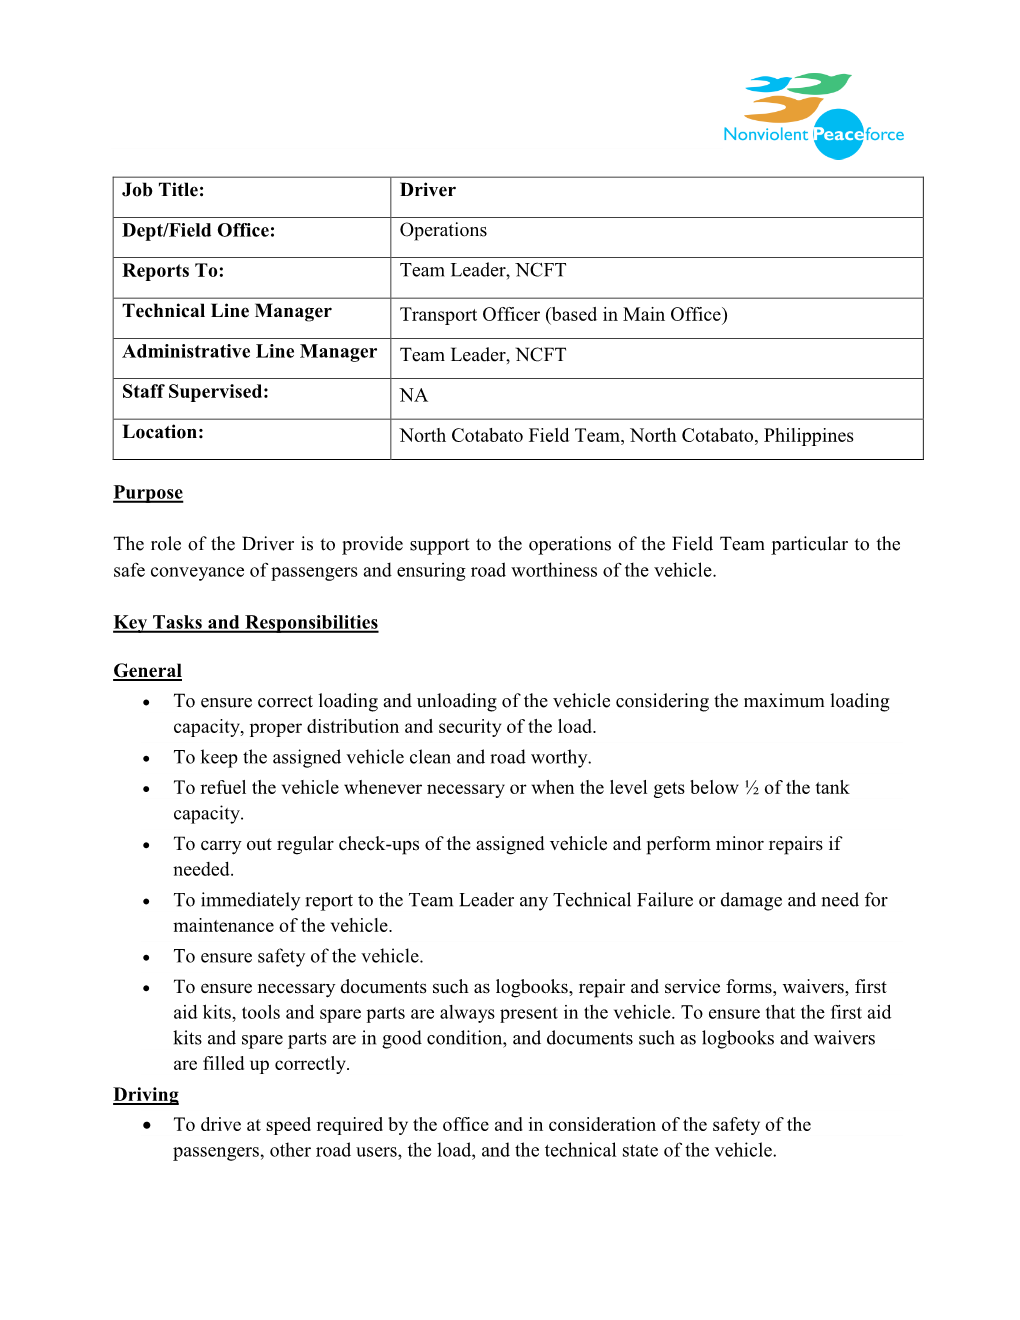 Driver Dept/Field Office: Operations Reports To: Team Leader, NCFT